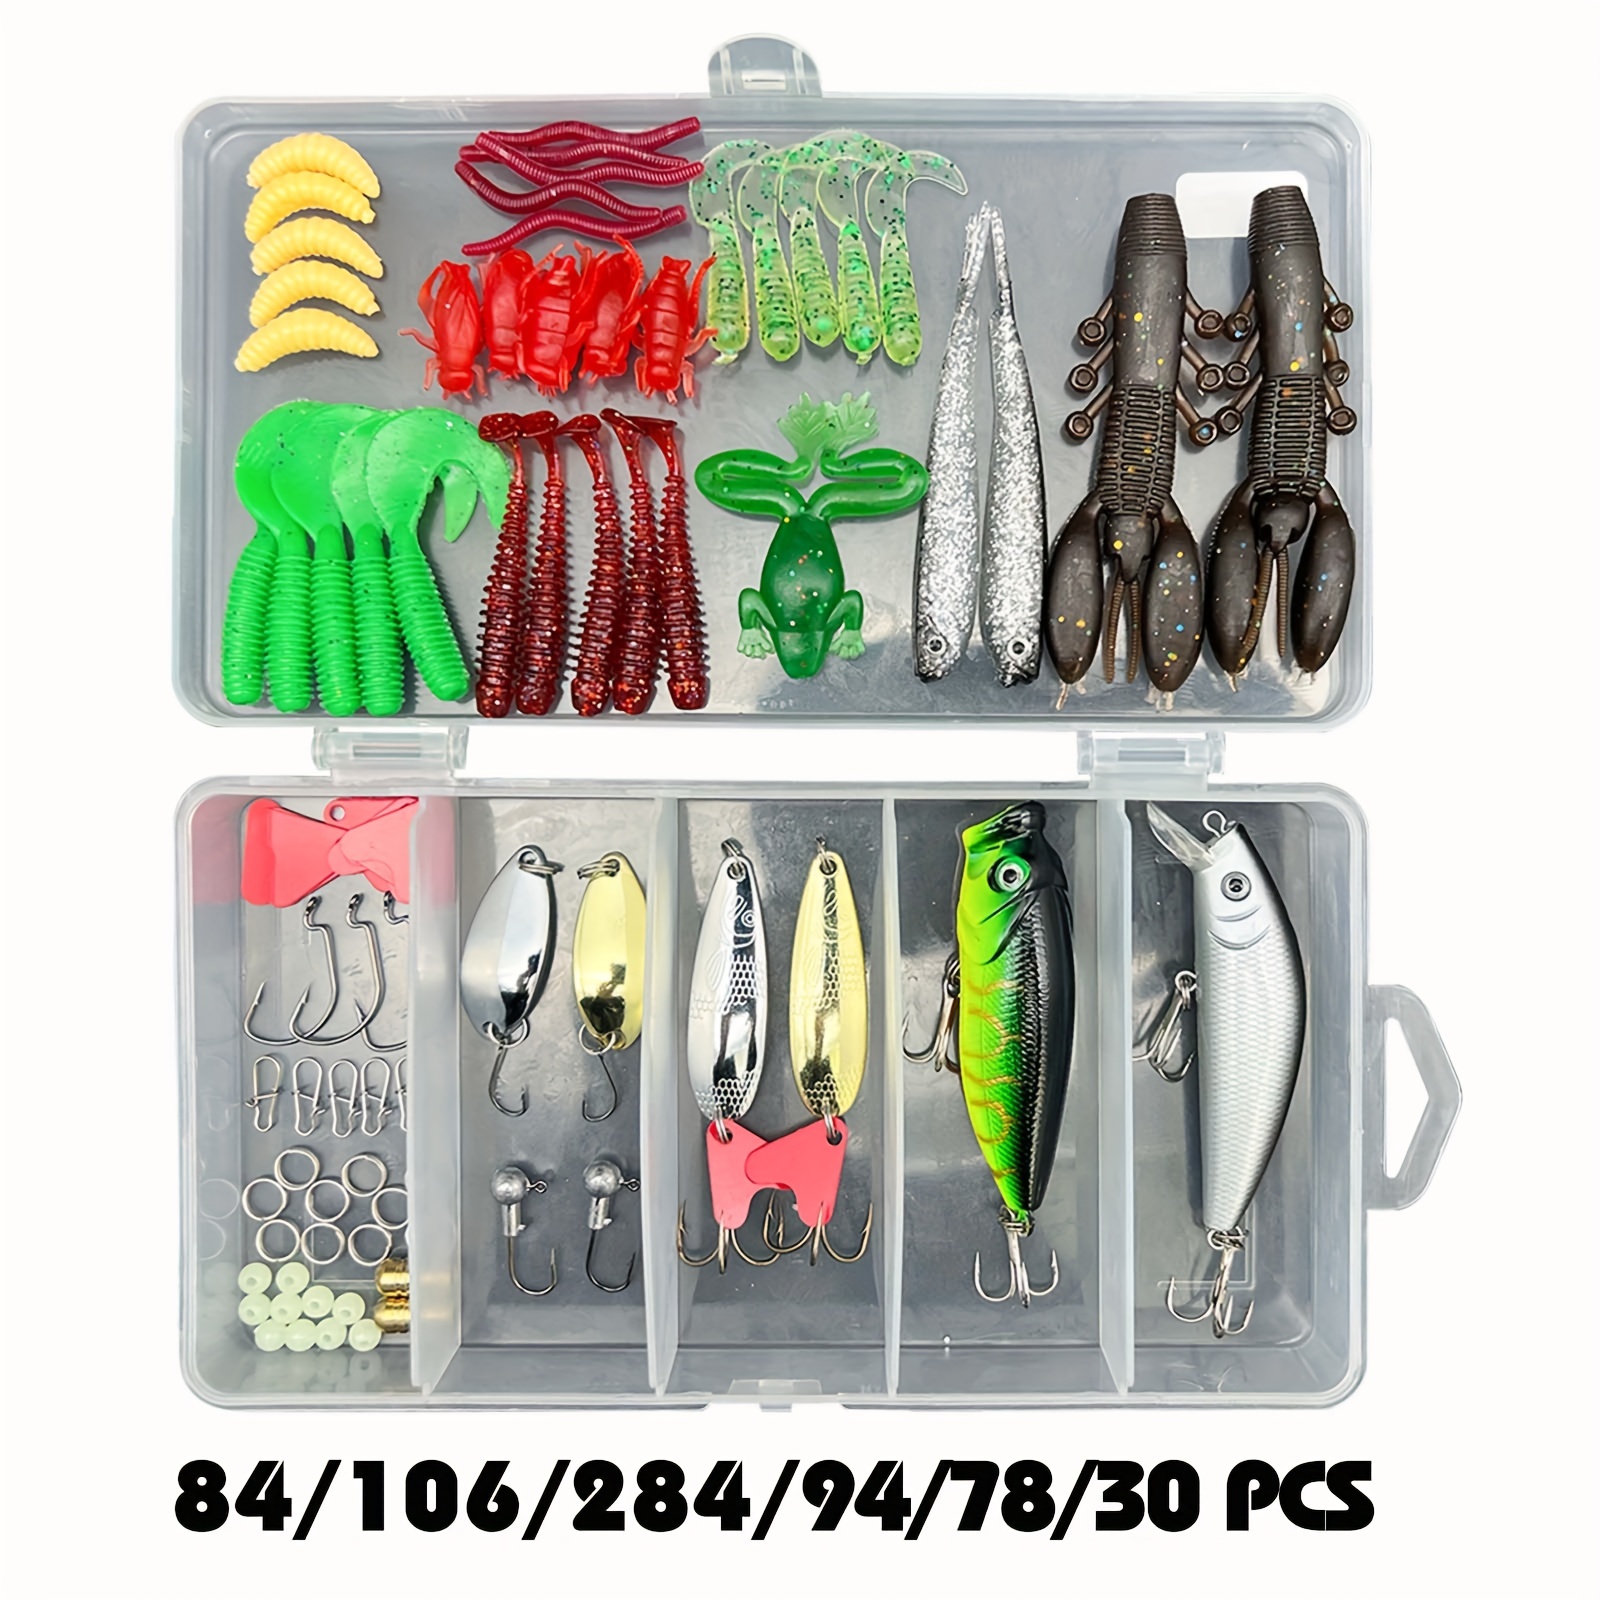 

79/84/93/106/283pcs Fishing Lures Set, Topwater Fishing Hooks Tackle Kit For Bass Trout Salmon, Including Minnow Popper Spoon Lures, Soft Plastic Worms Bait, Jigs Head Hook